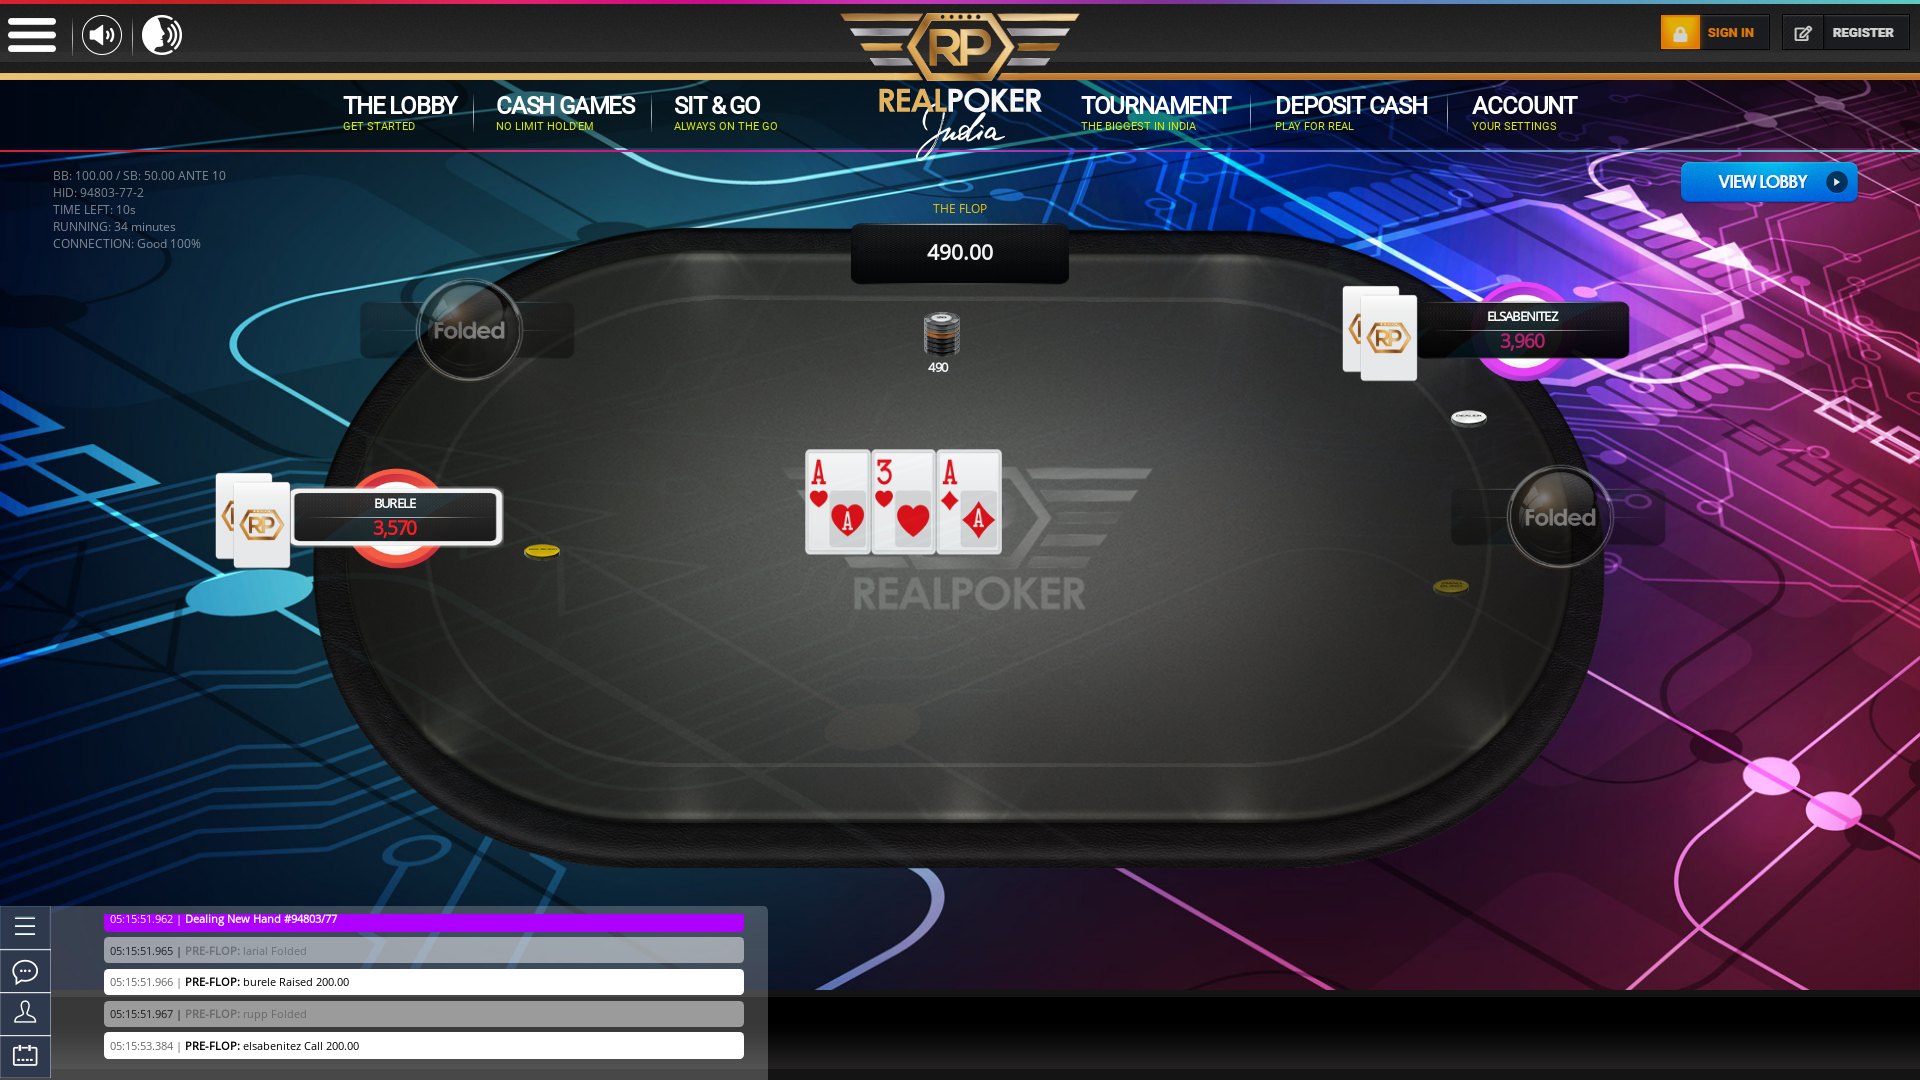 Bardez online poker game on a 10 player table in the 33rd minute of the game